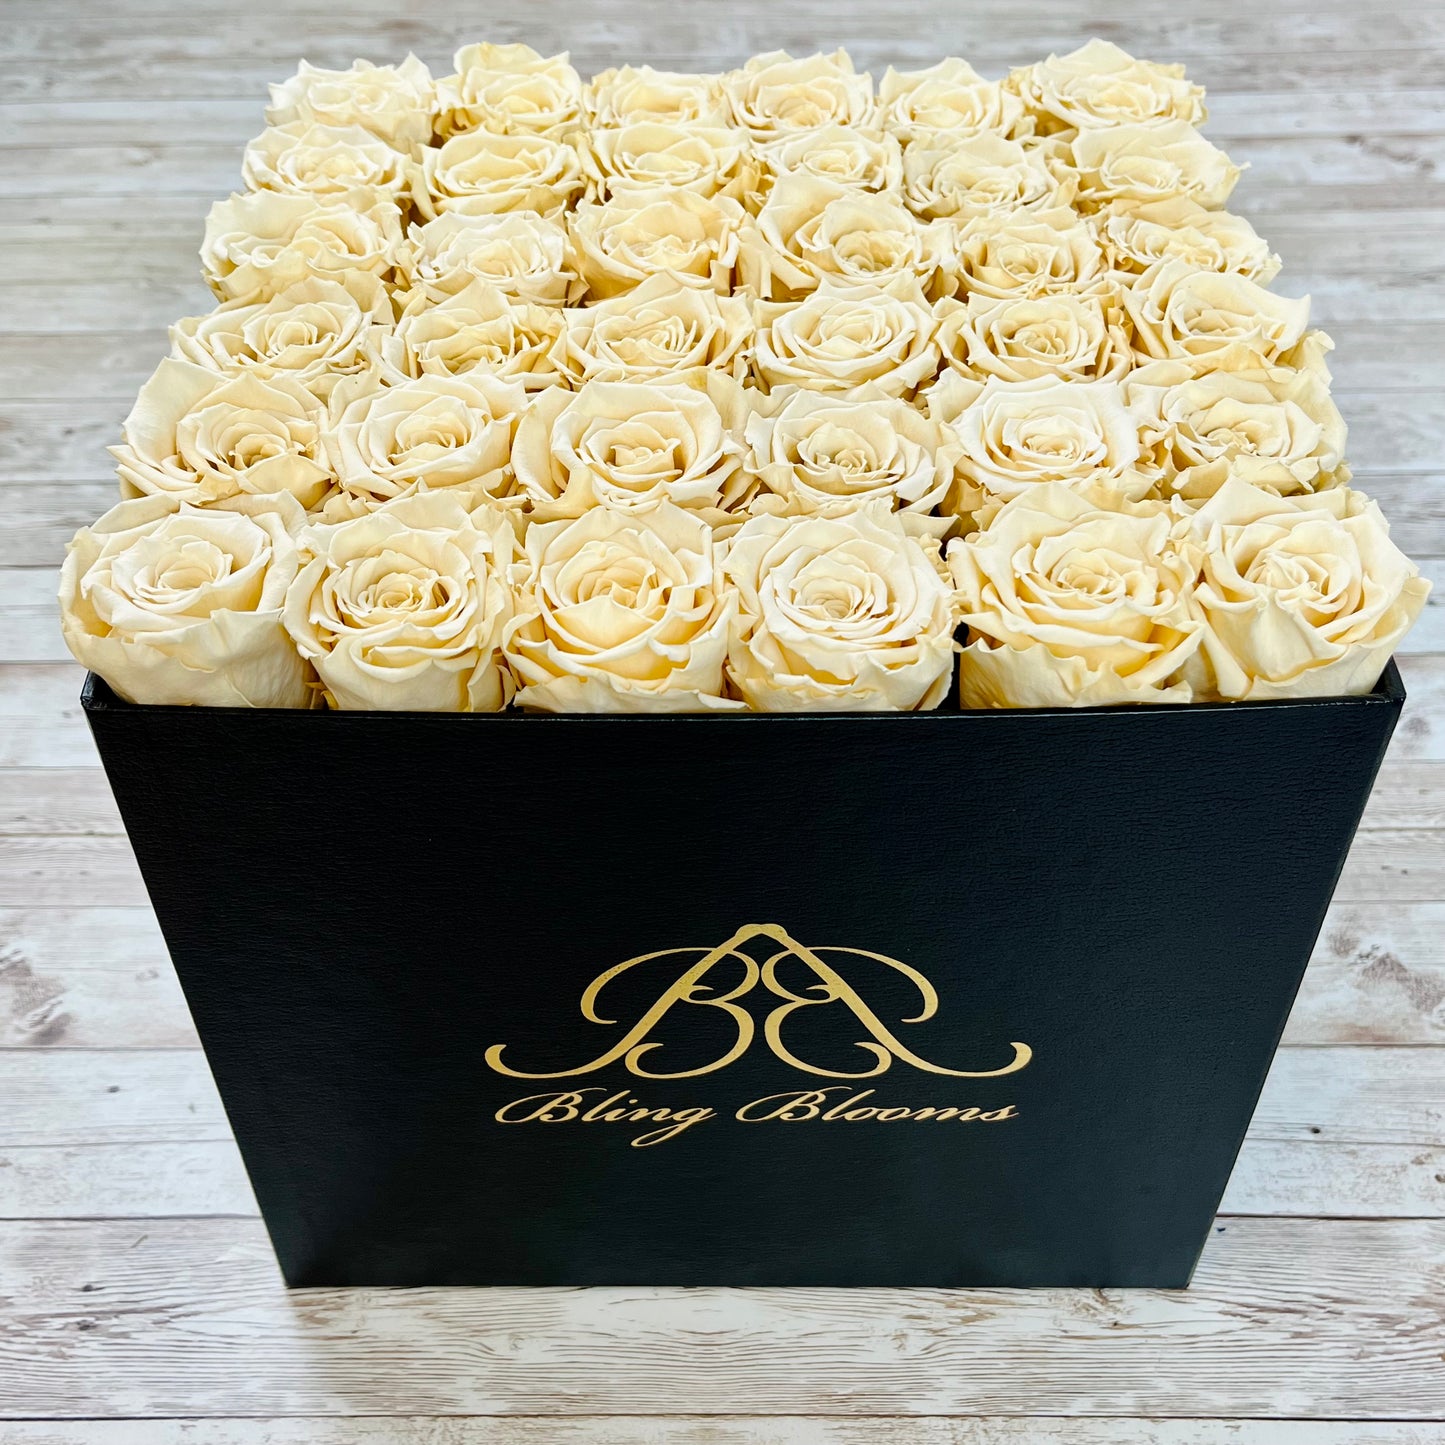 Black Square Bloom Box - Infinity Roses - Champagne One Year Roses - Box of Roses - Rose Colours divider-Vintage Champagne